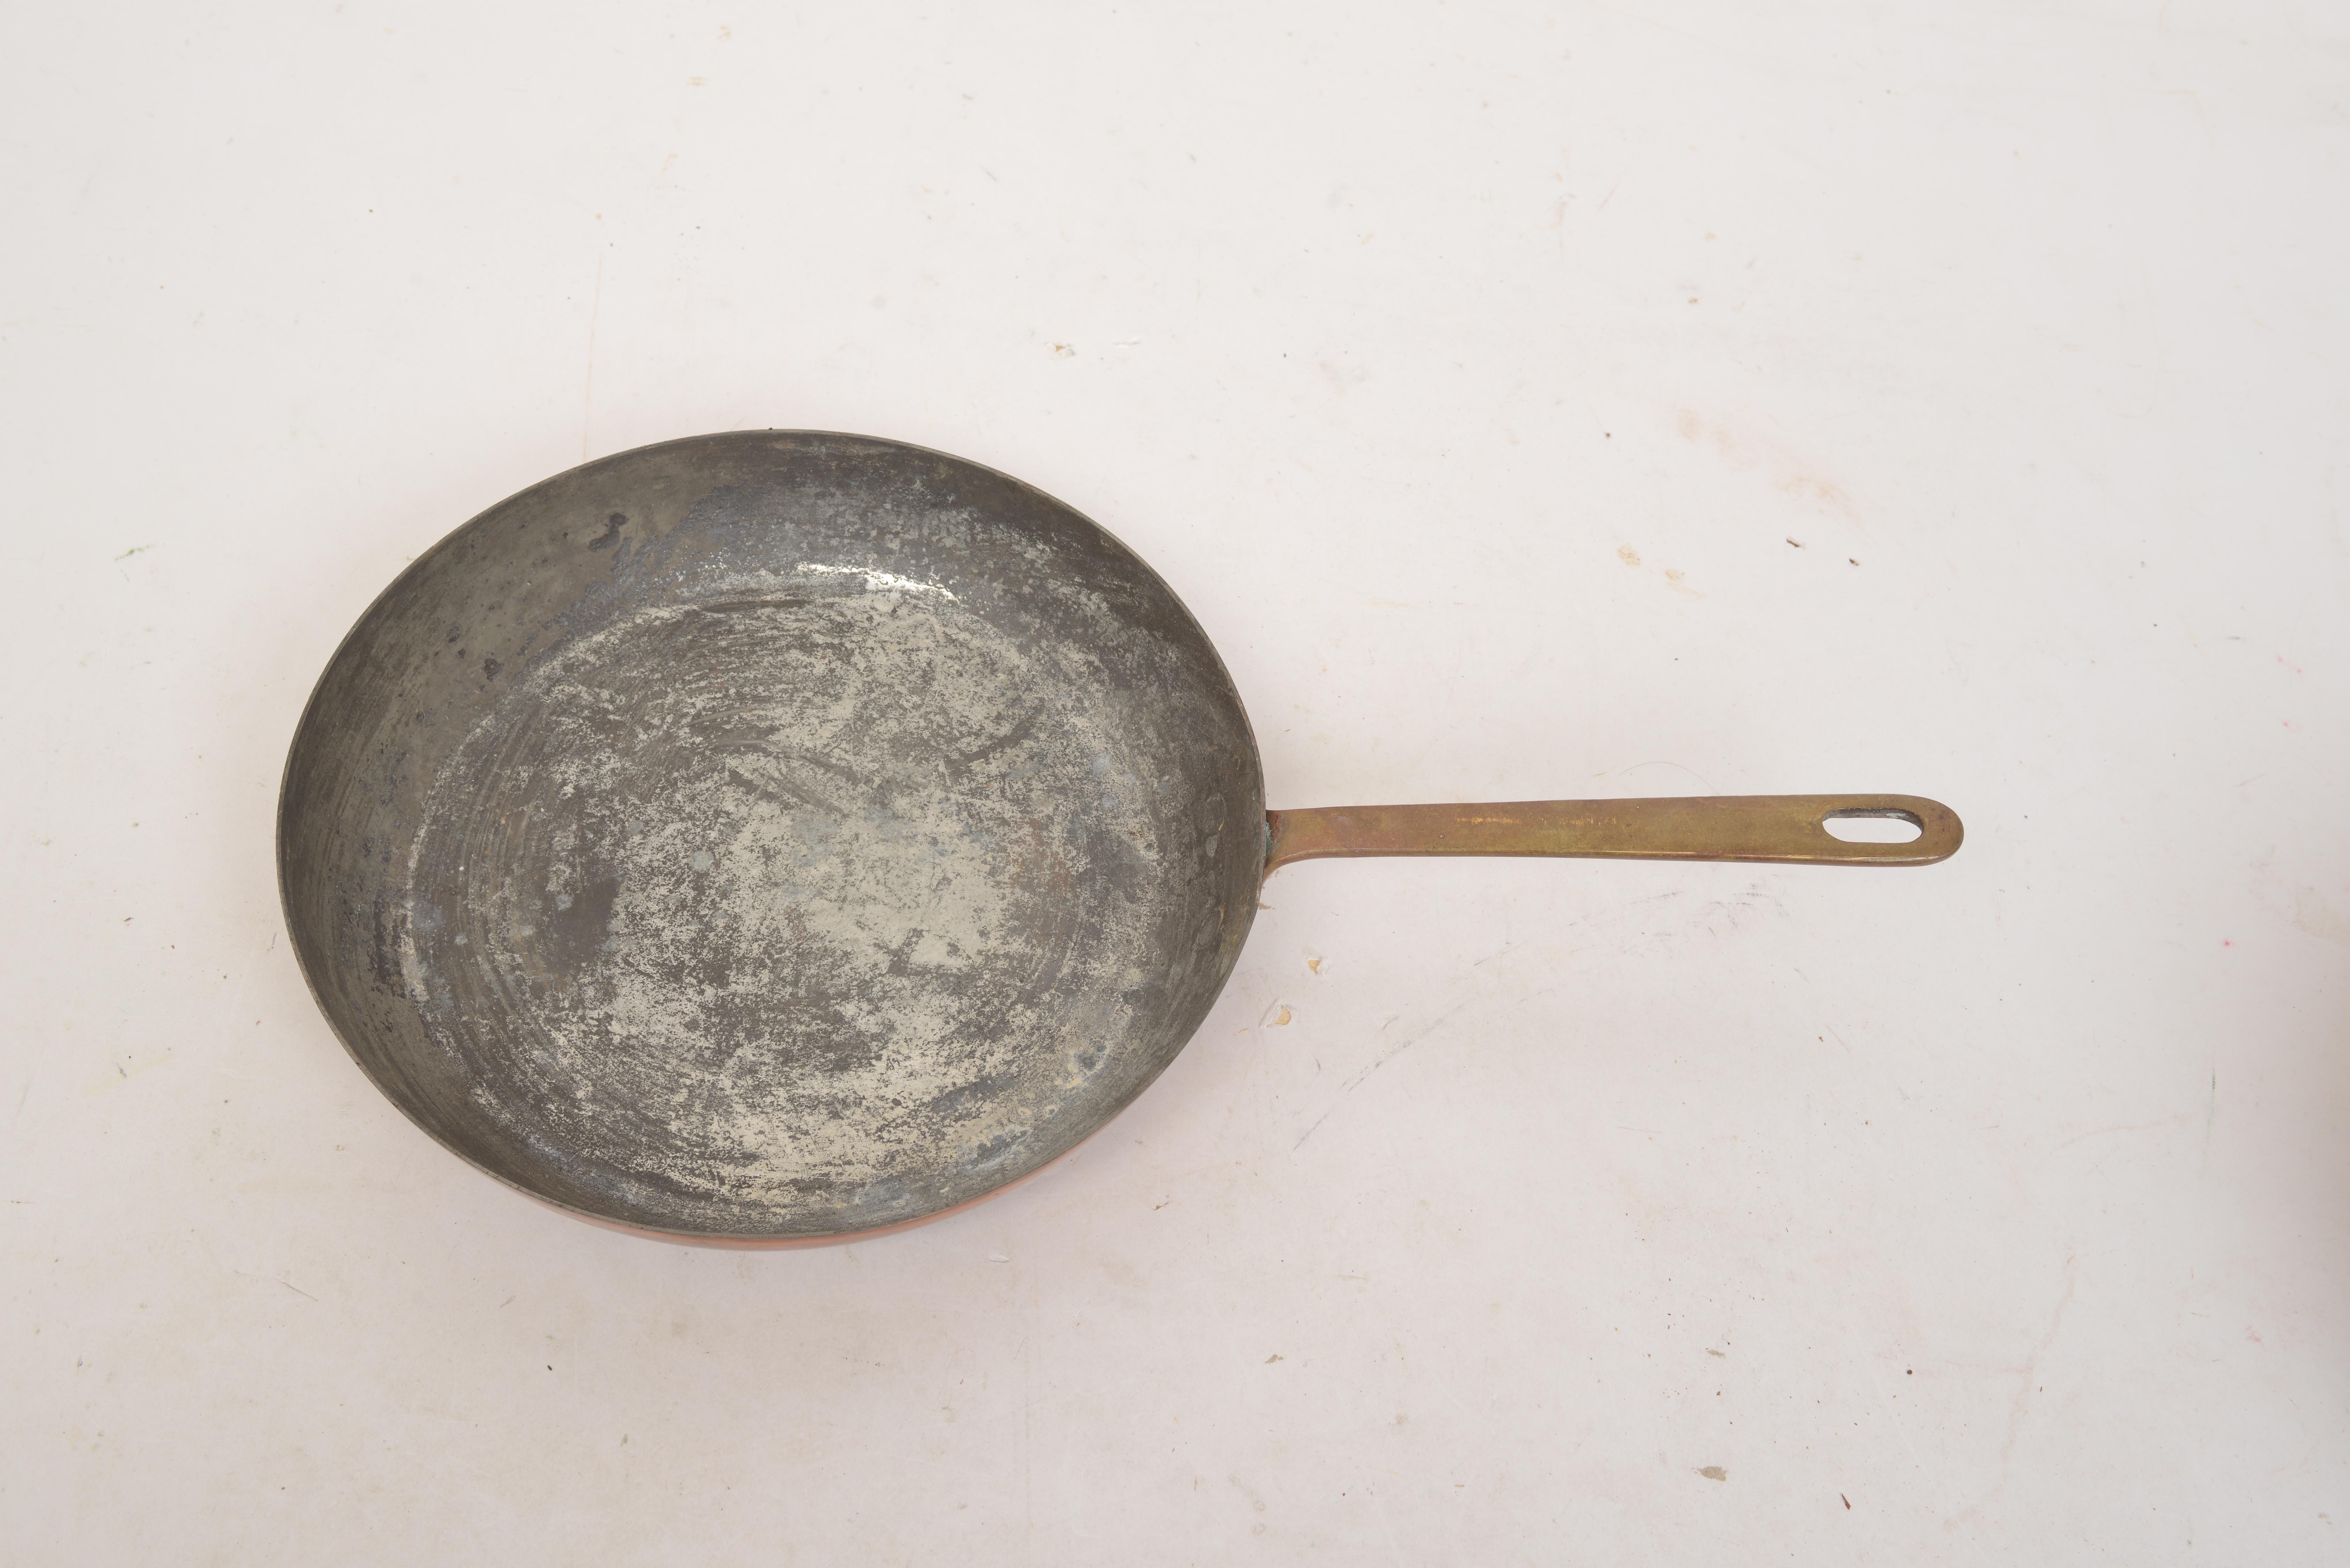 Set of 5 early copper pans, in original condition, Great patina, 18th/19th c. The pans all with traditional bronze or hand worked iron handles which are riveted on.
1. Deep sauce pan iron handle with hanging ring. 11